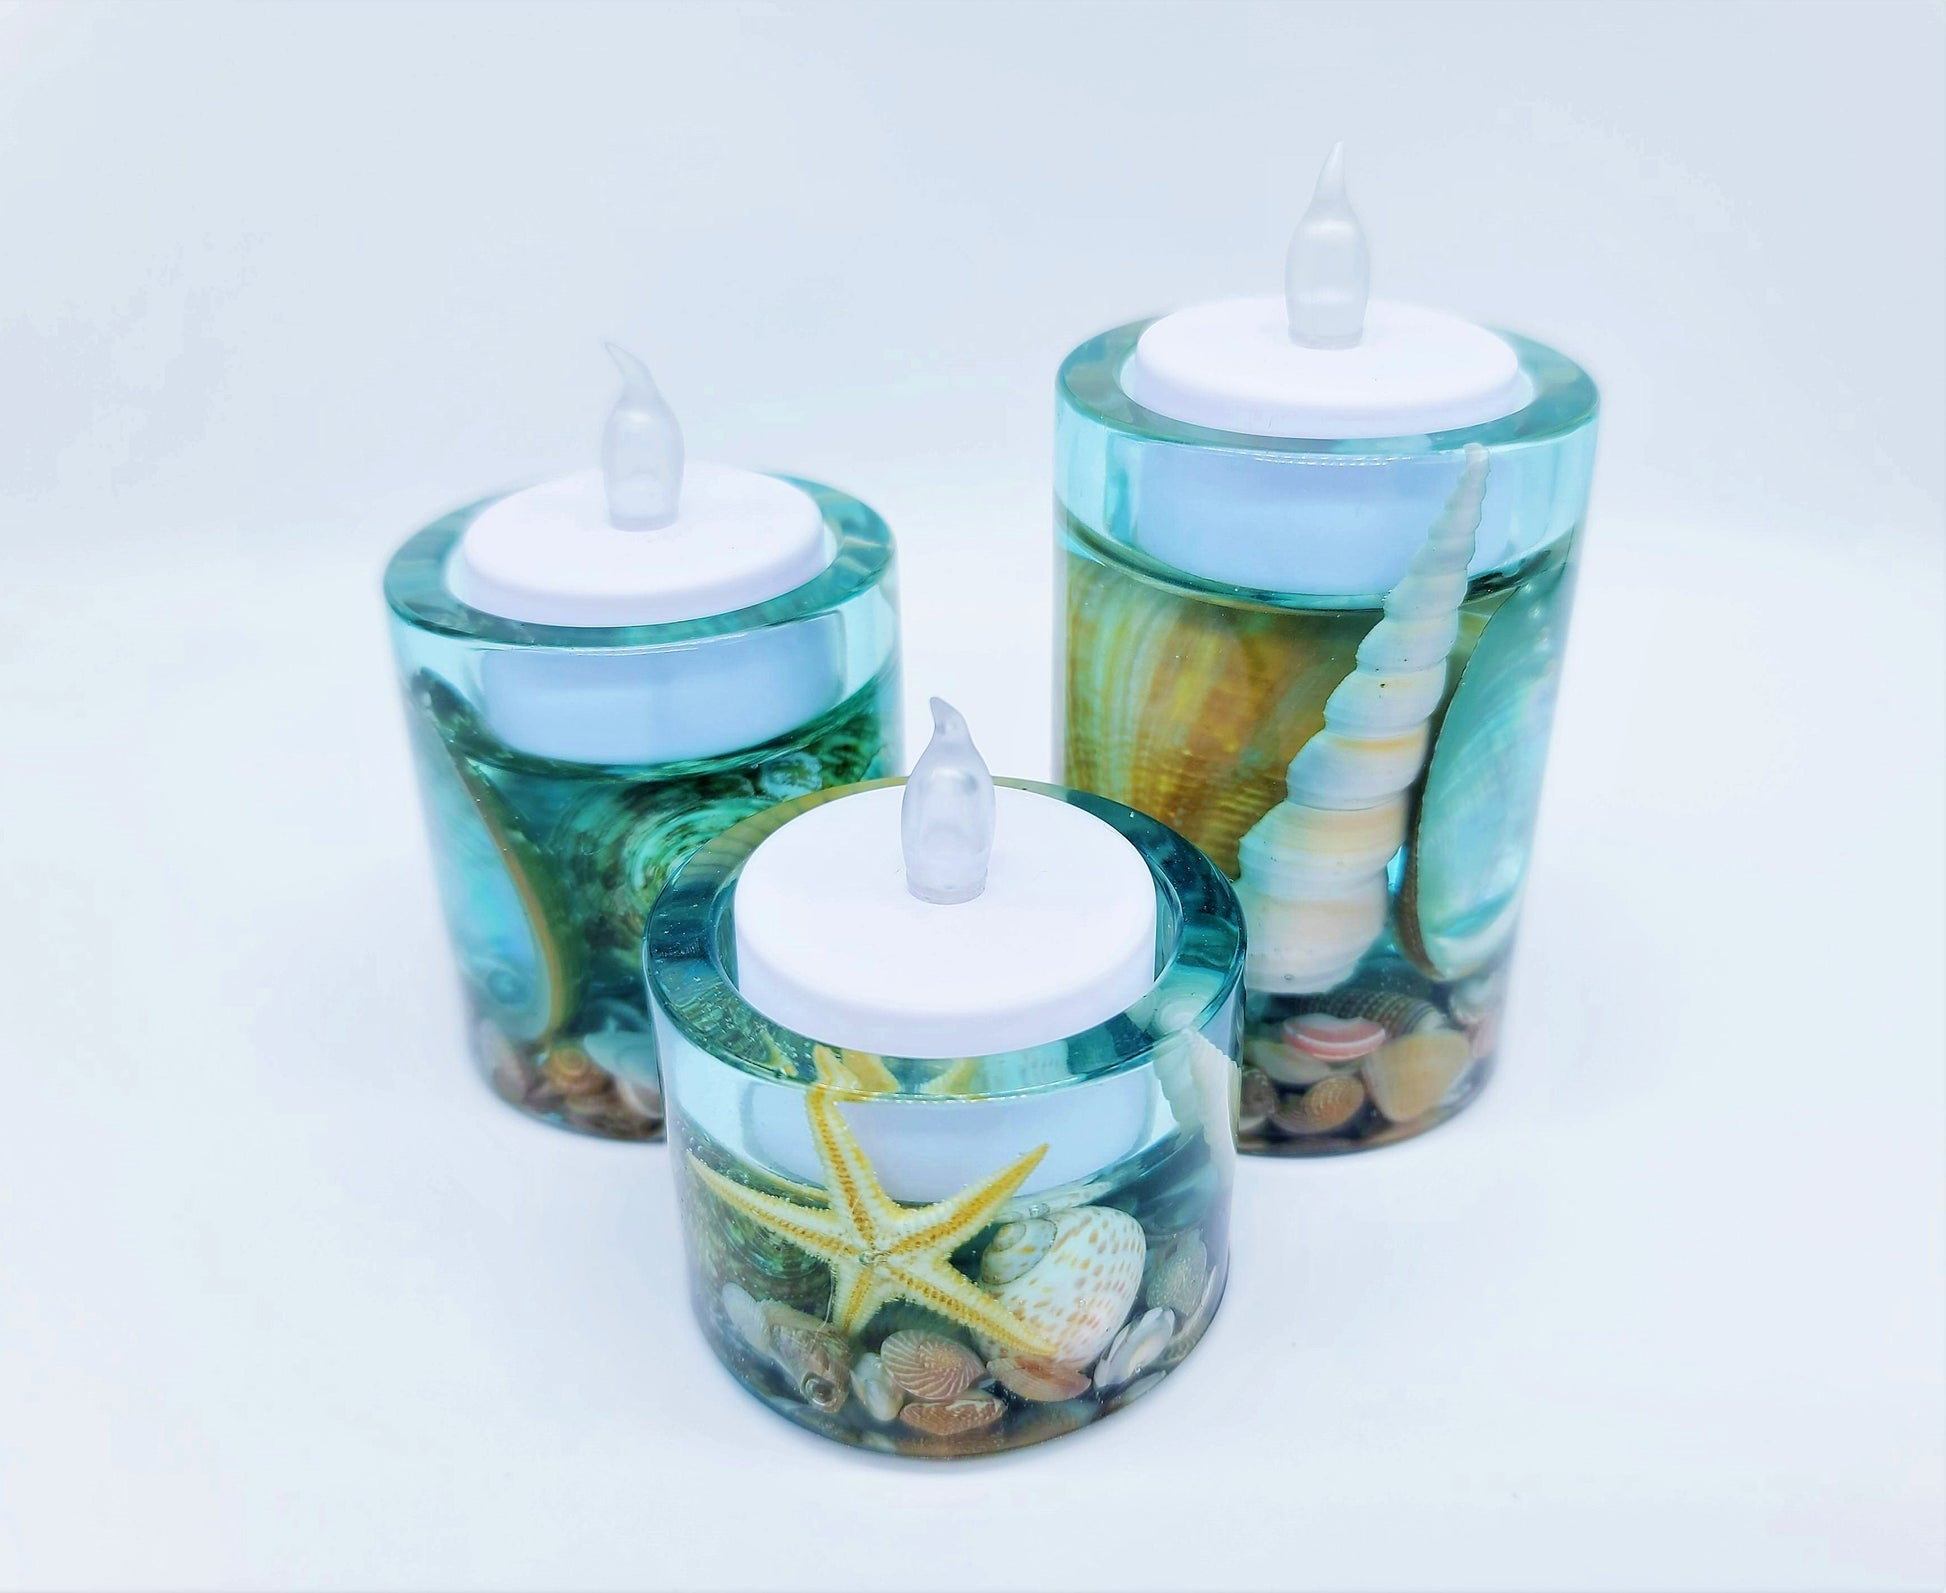 Seascape Candle Holder Made with Eco-Friendly Epoxy Resin and Seashells - Includes Choice of Real UNSCENTED Tealight or LED Tealight